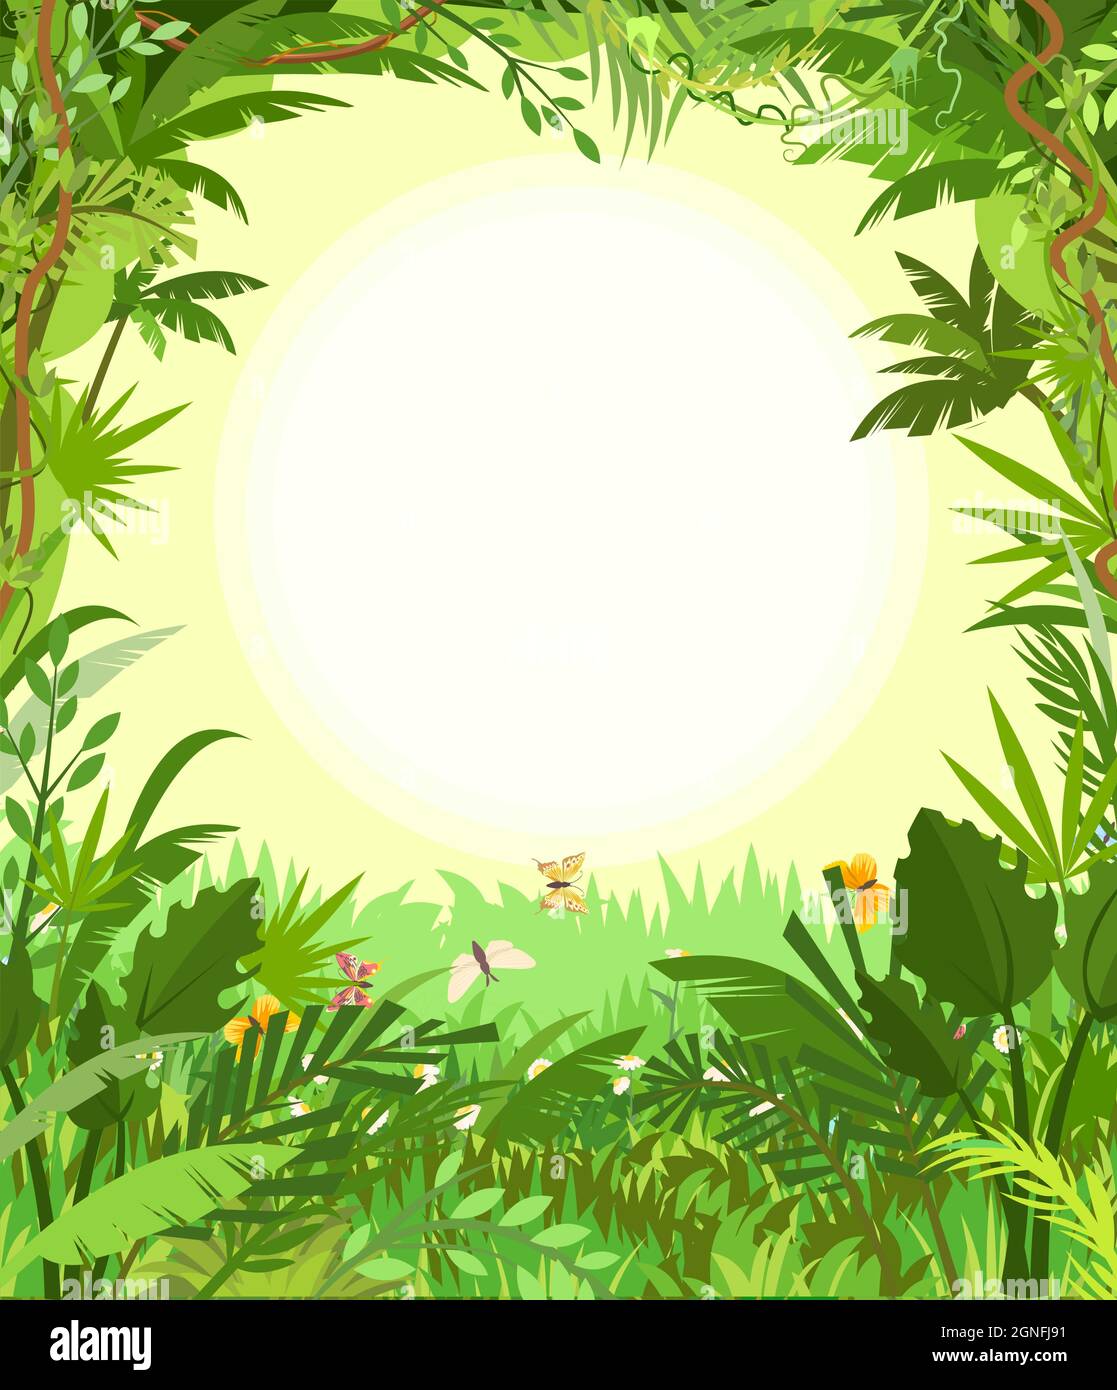 Jungle background. Plants rainforest. Sun in the morning sky. Meadow with butterflies. Beautiful green landscape with exotic trees and palms. Cute Stock Vector